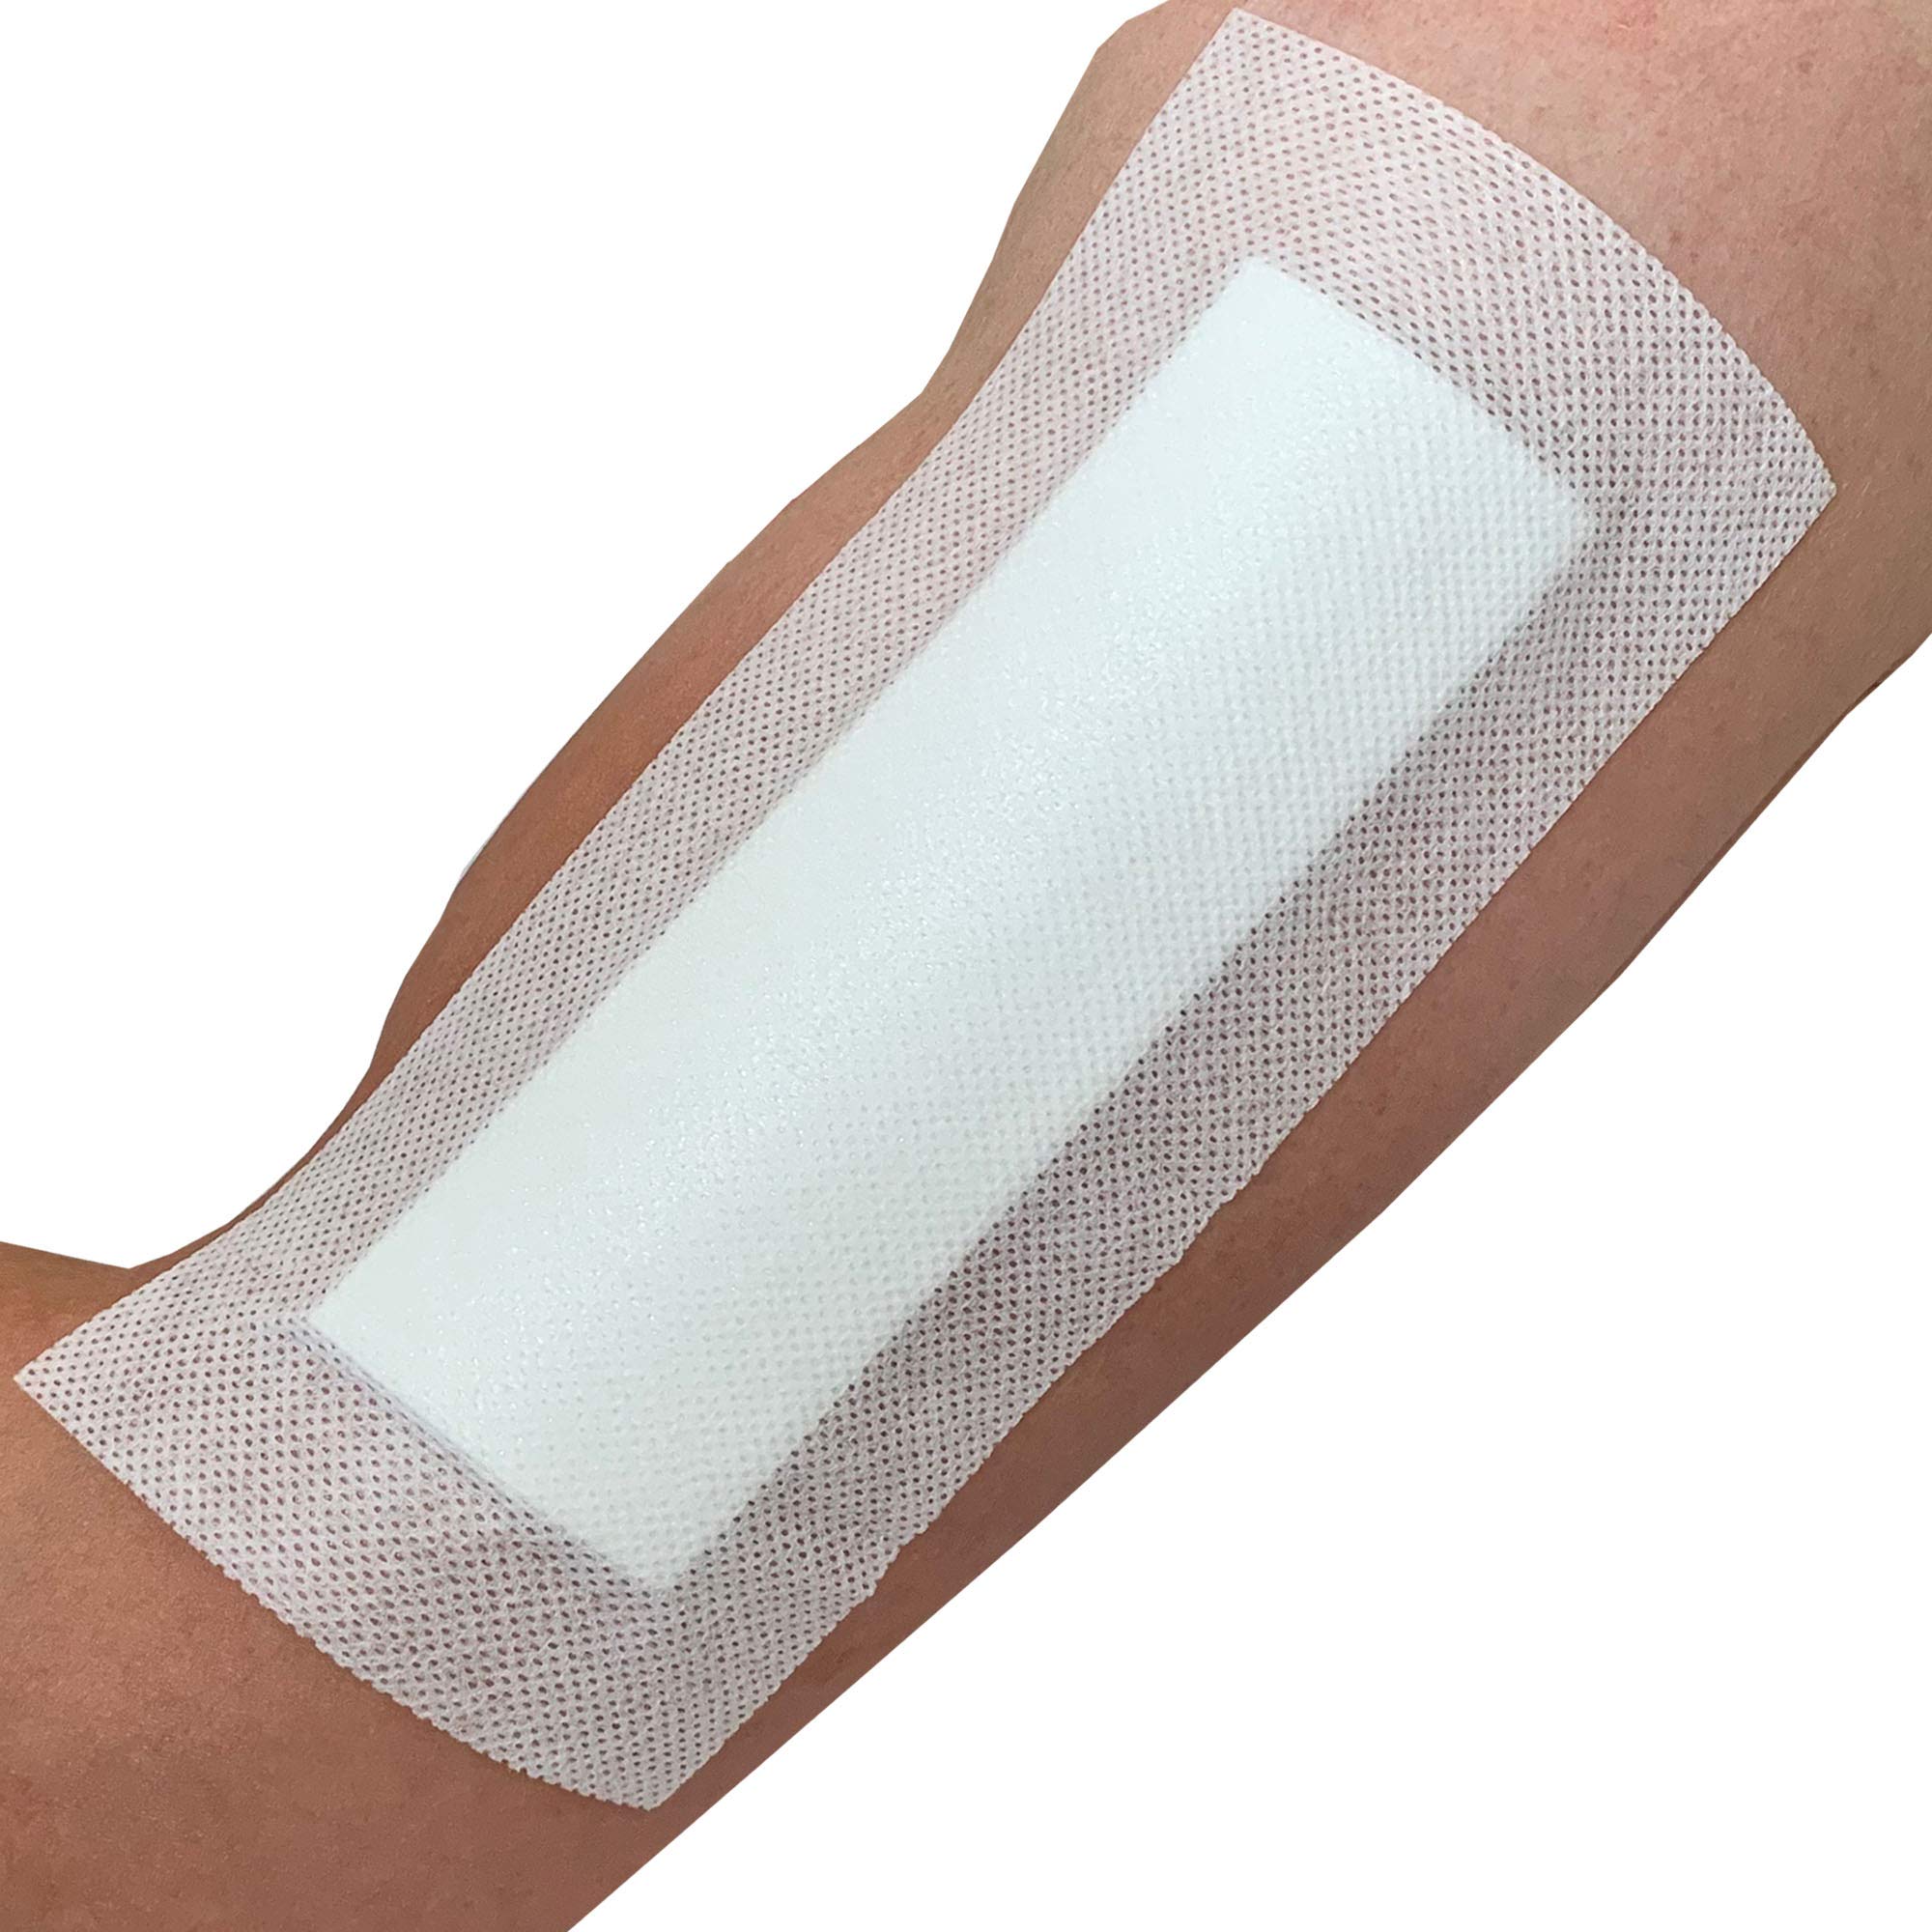 Pack of 25 Large Adhesive Sterile Wound Dressings - Suitable for cuts and grazes, Diabetic Leg ulcers, venous Leg ulcers, Pressure sores (10cm x 20cm)